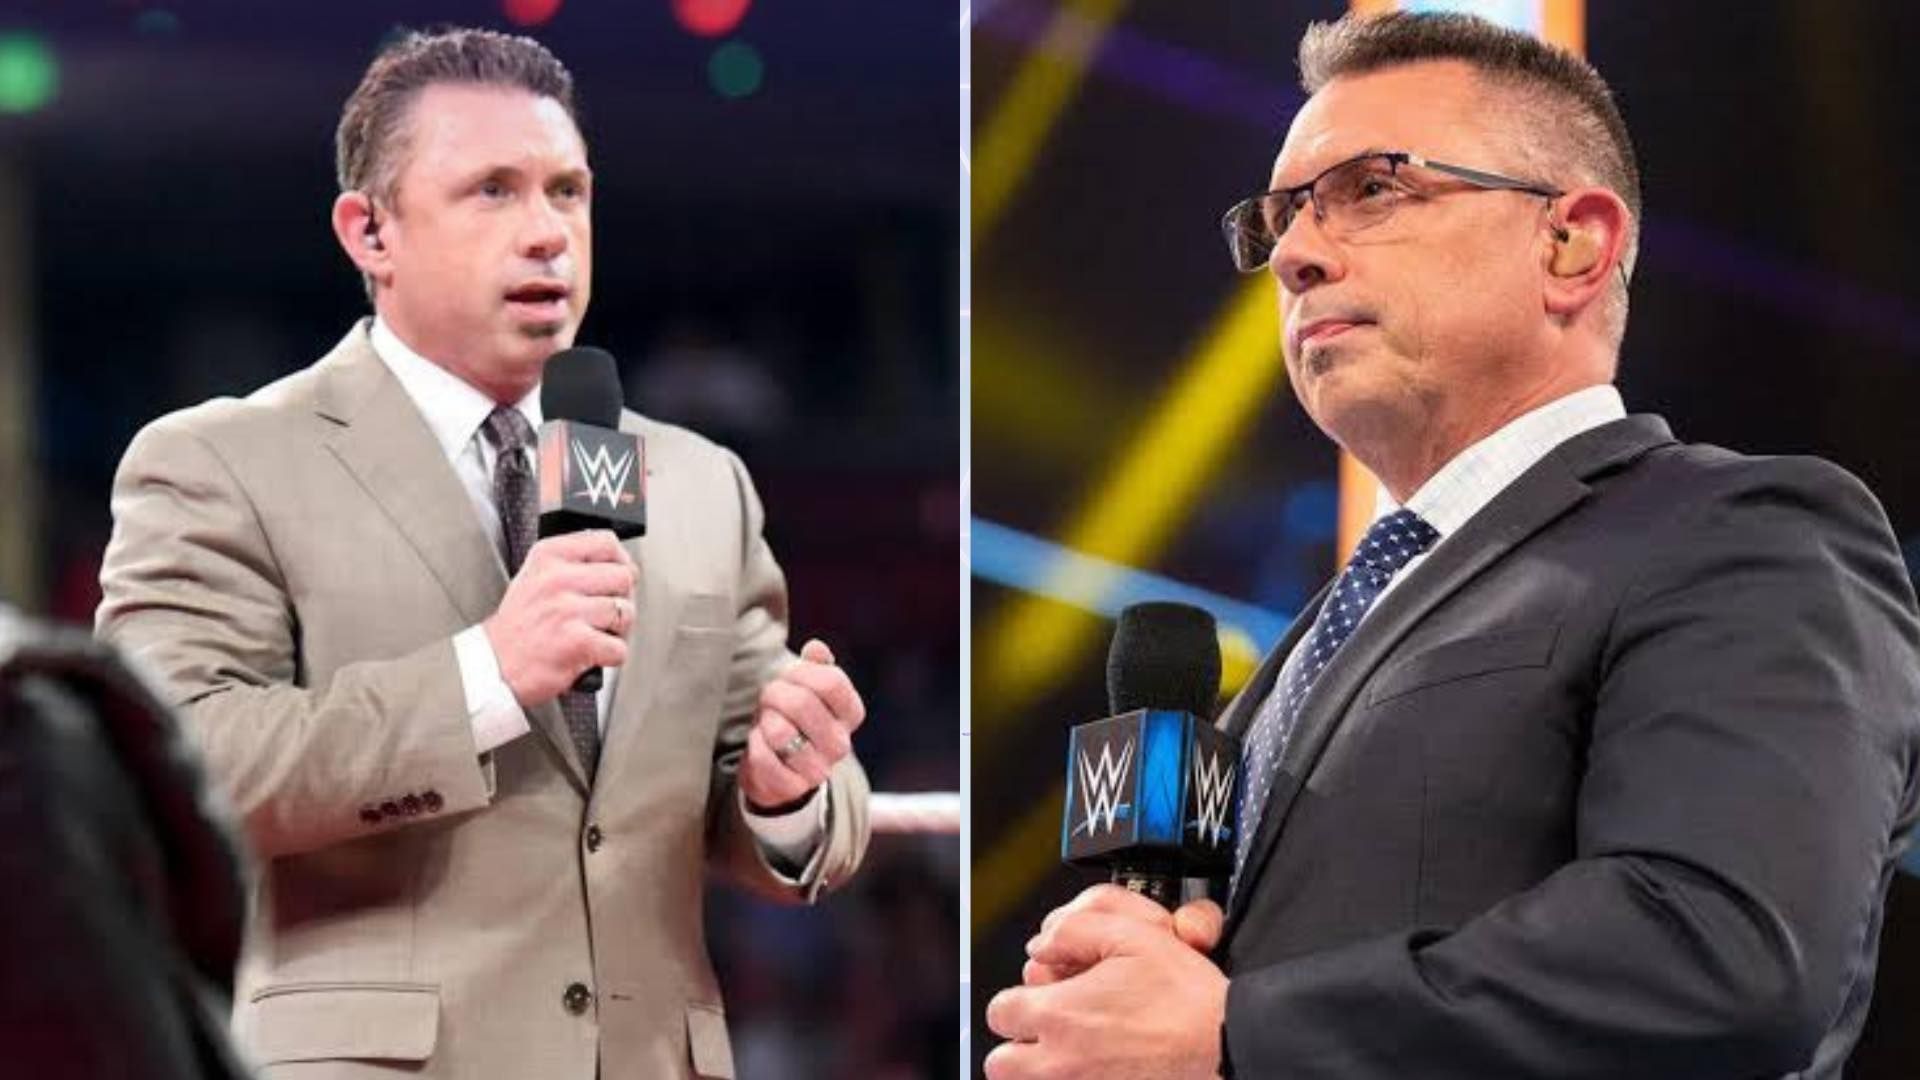 Michael Cole is one of WWE